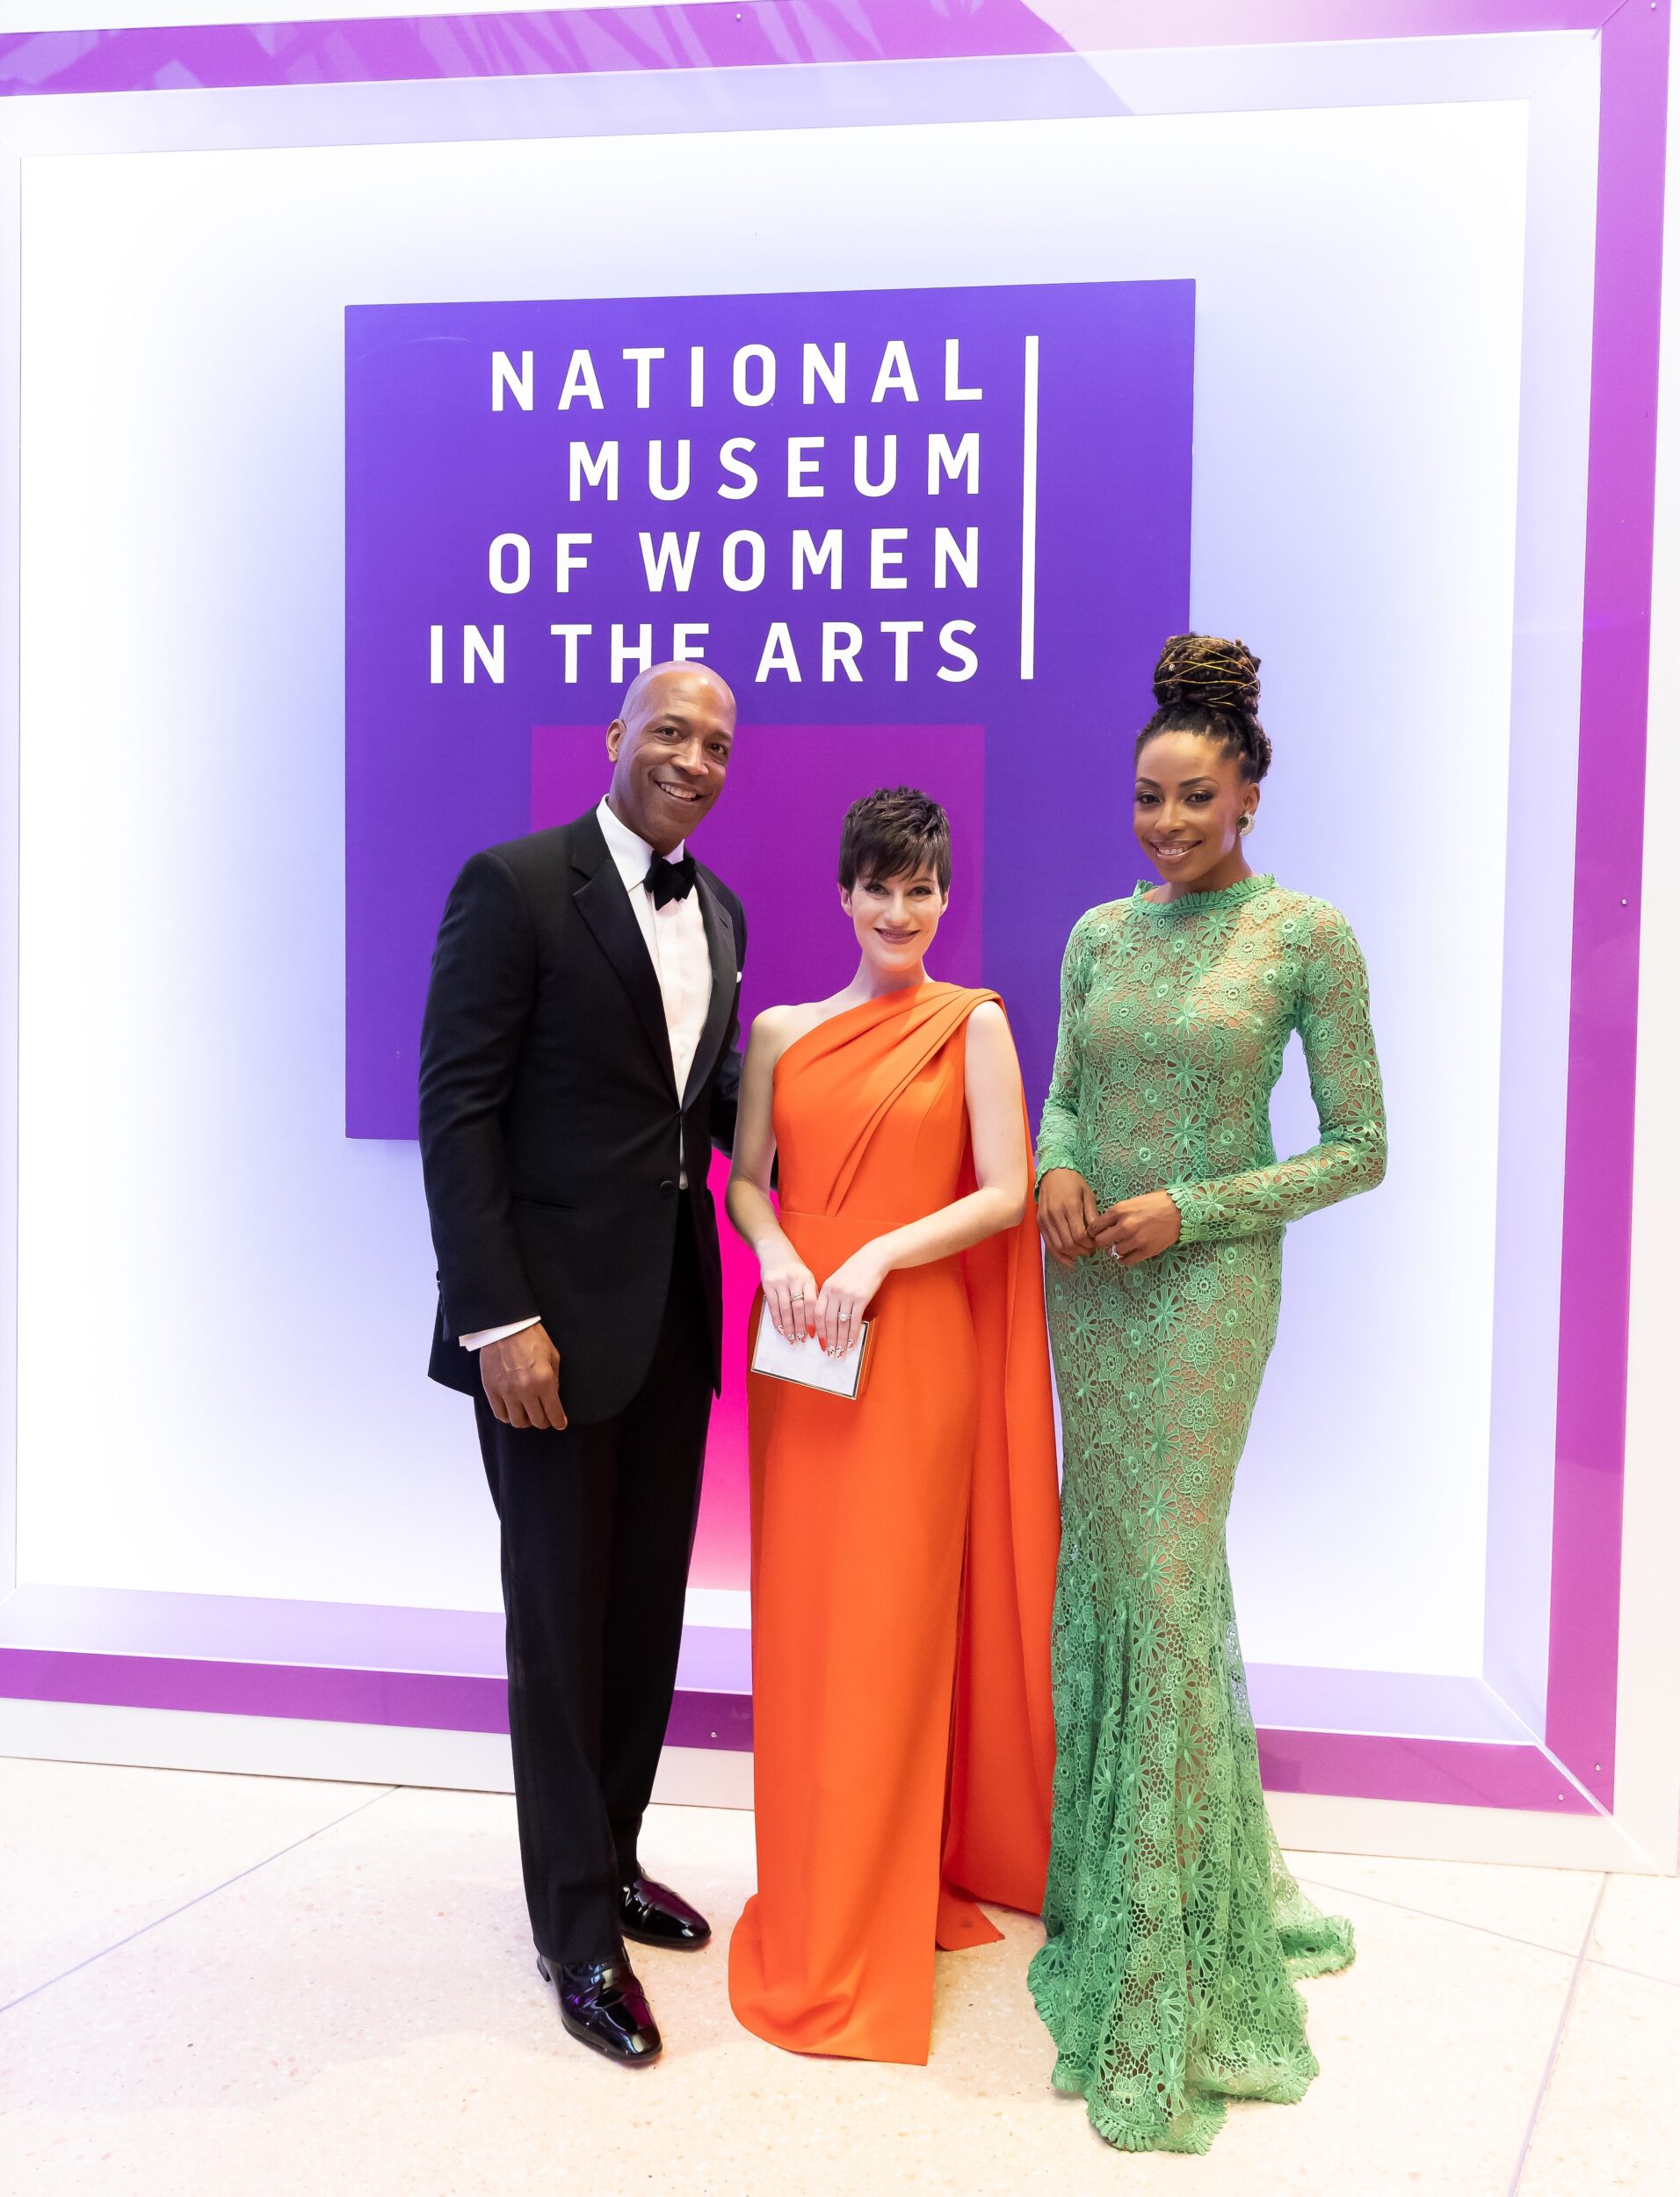 A medium-skinned man and woman pose for a photo with a light-skinned woman at a black-tie event. Behind the group is a colorful backdrop with the National Museum of Women in the Arts logo on it.